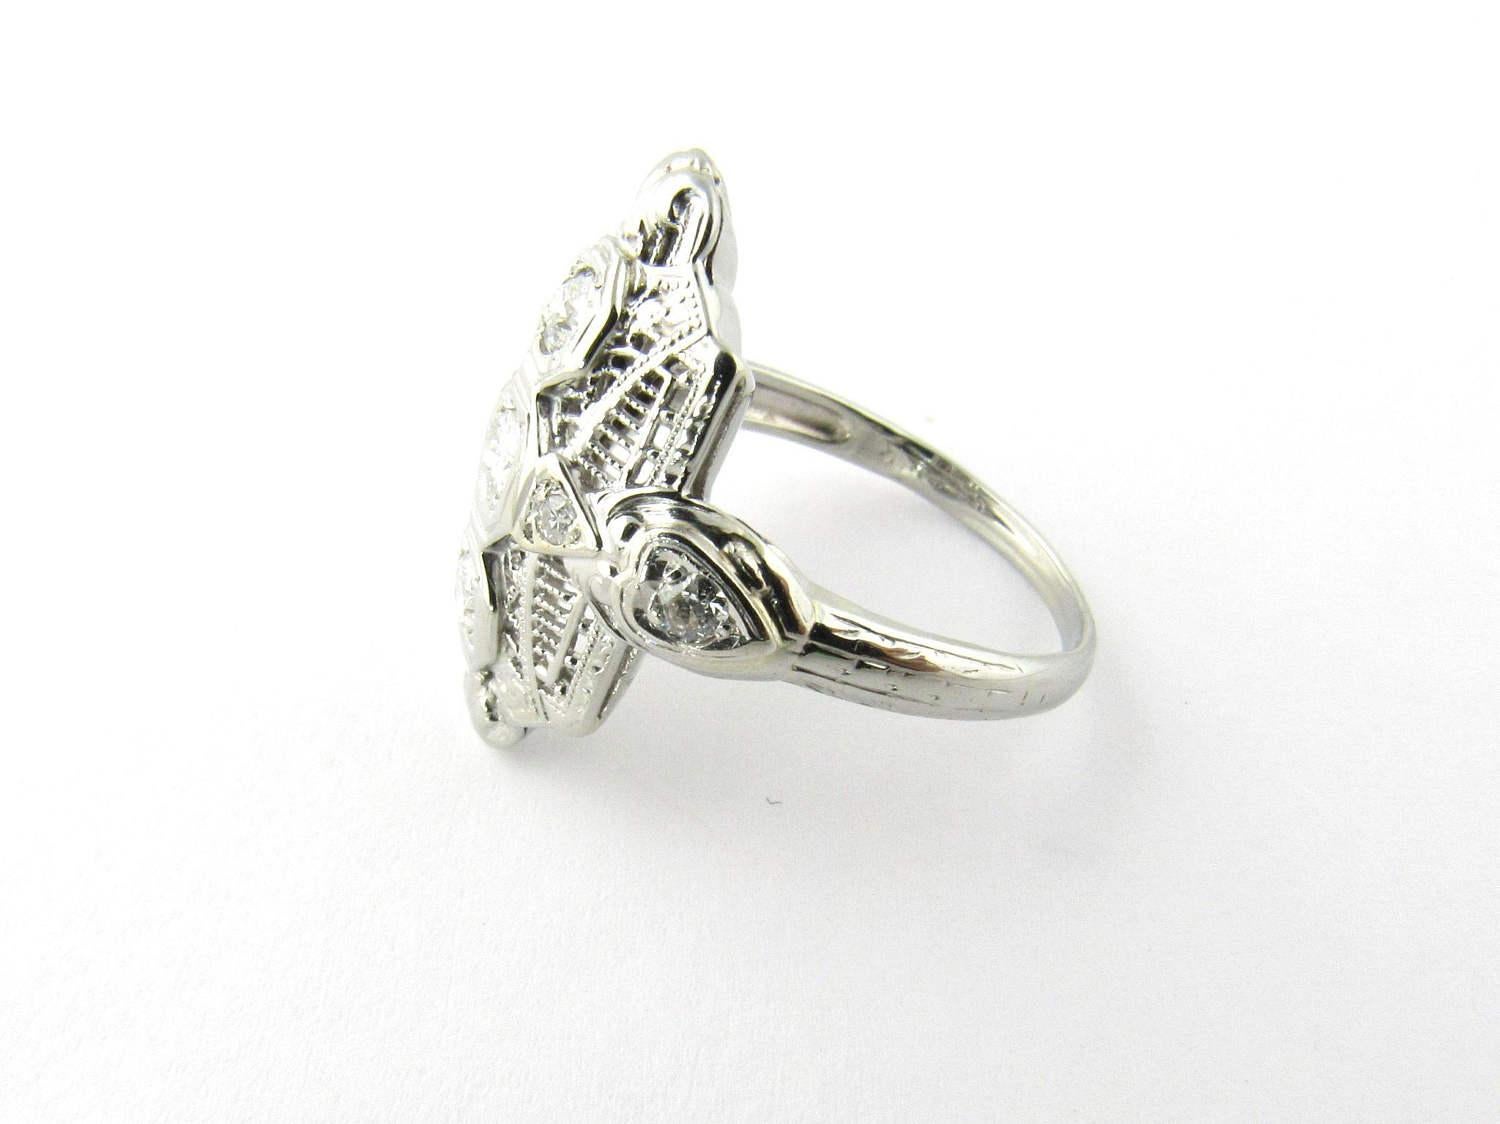 Vintage 14K White Gold Filigree Ring. 

Ring Size 7. 

This beautiful ring is the perfect accessory for that special evening out. 

The front of the ring measures approx 9 mm x 4 mm x 20 mm. 

The shank measures approx 2 mm. 

1 European cut